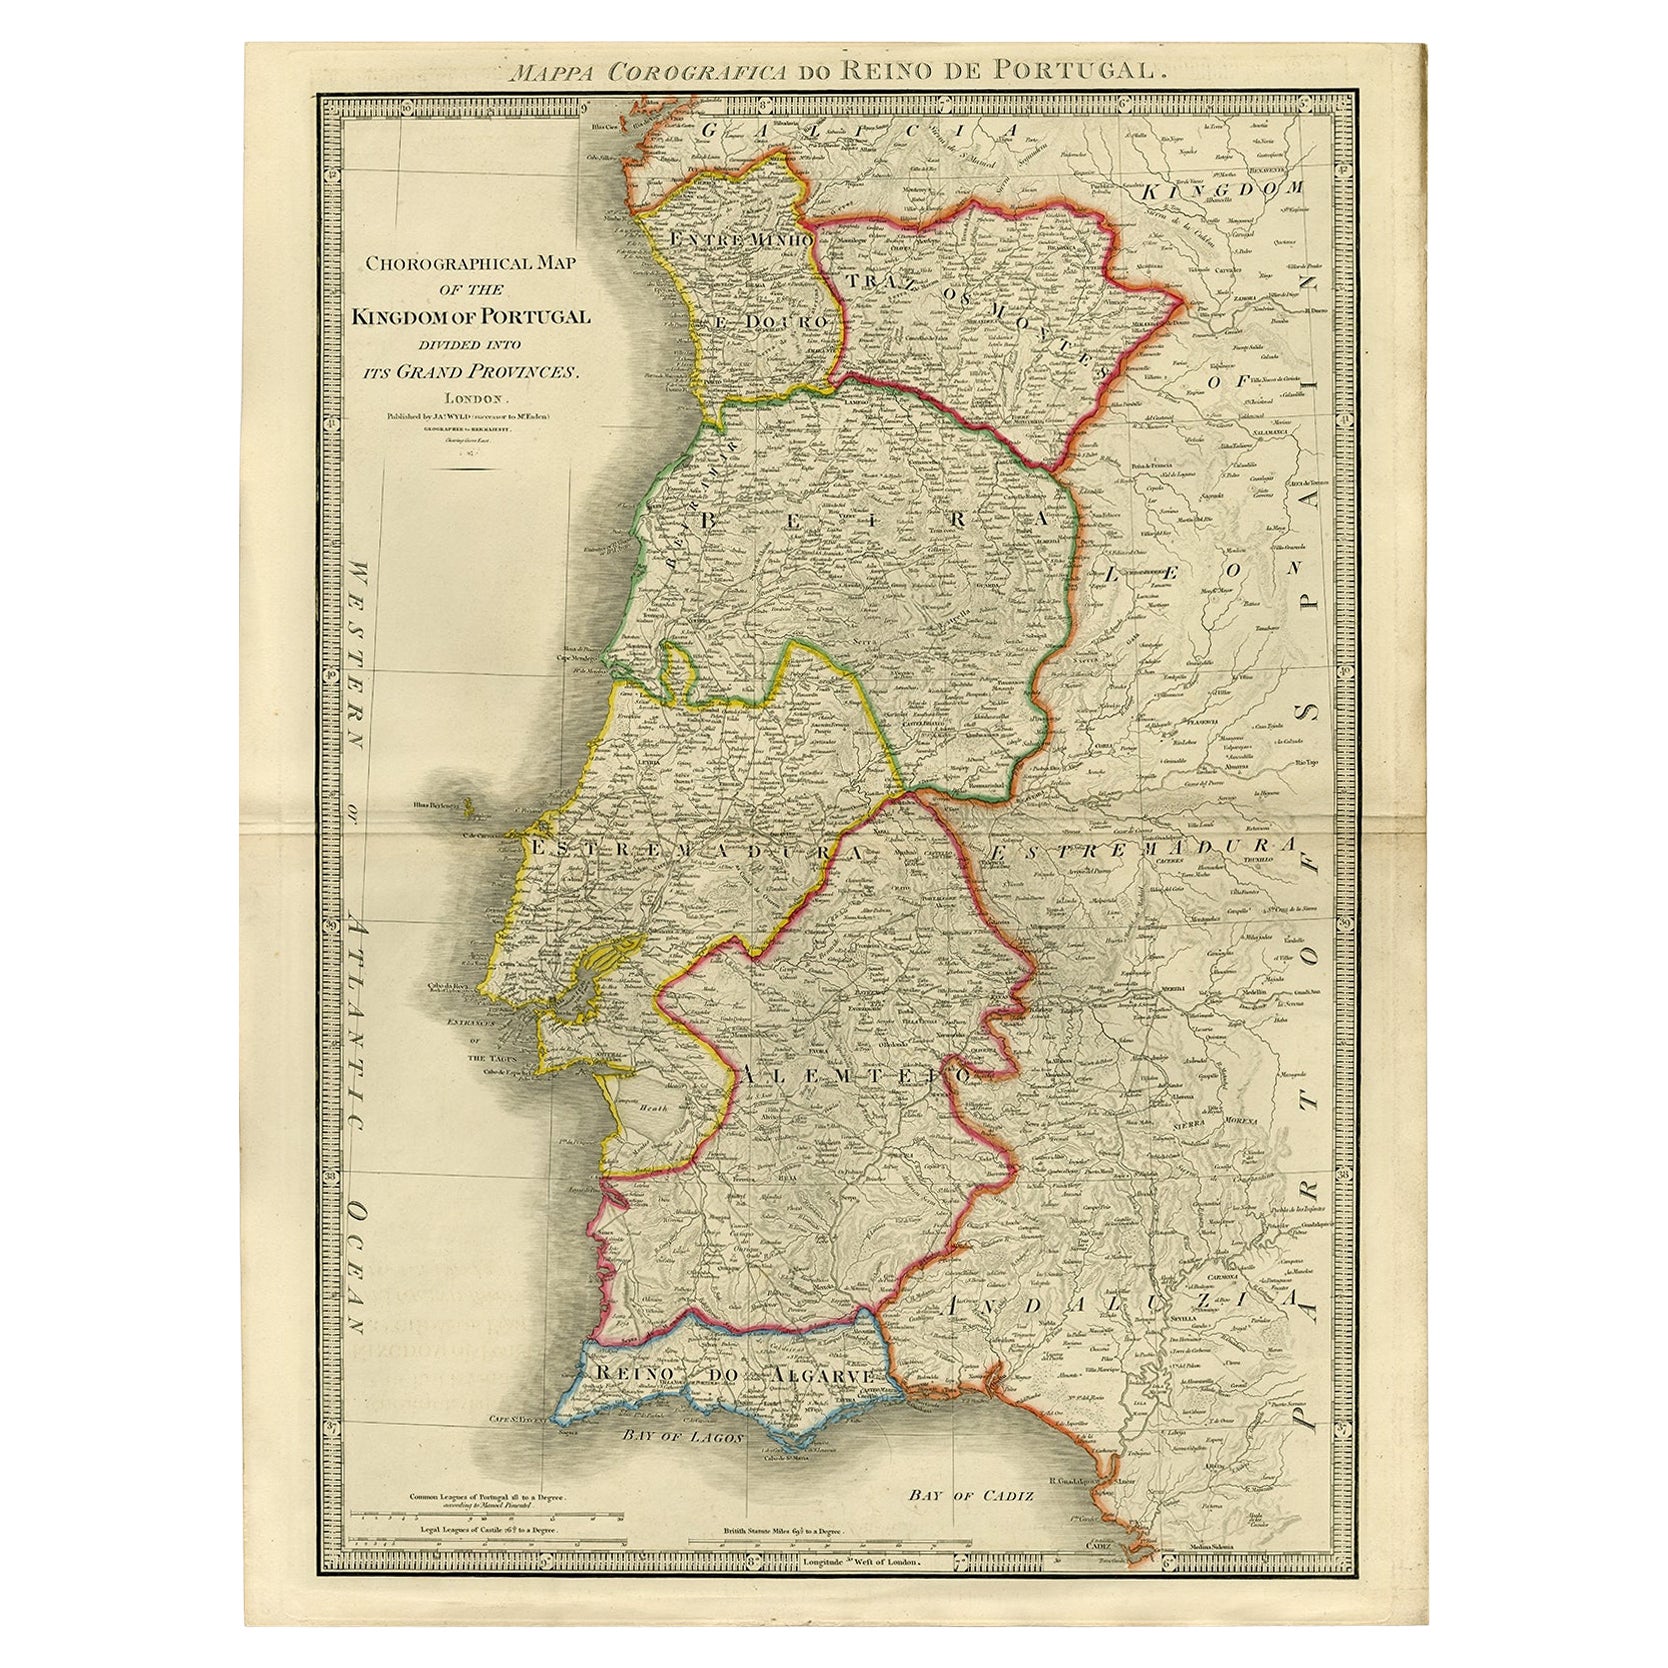 Engraved Large Map of The Kingdom of Portugal Original Handcolored, 1854